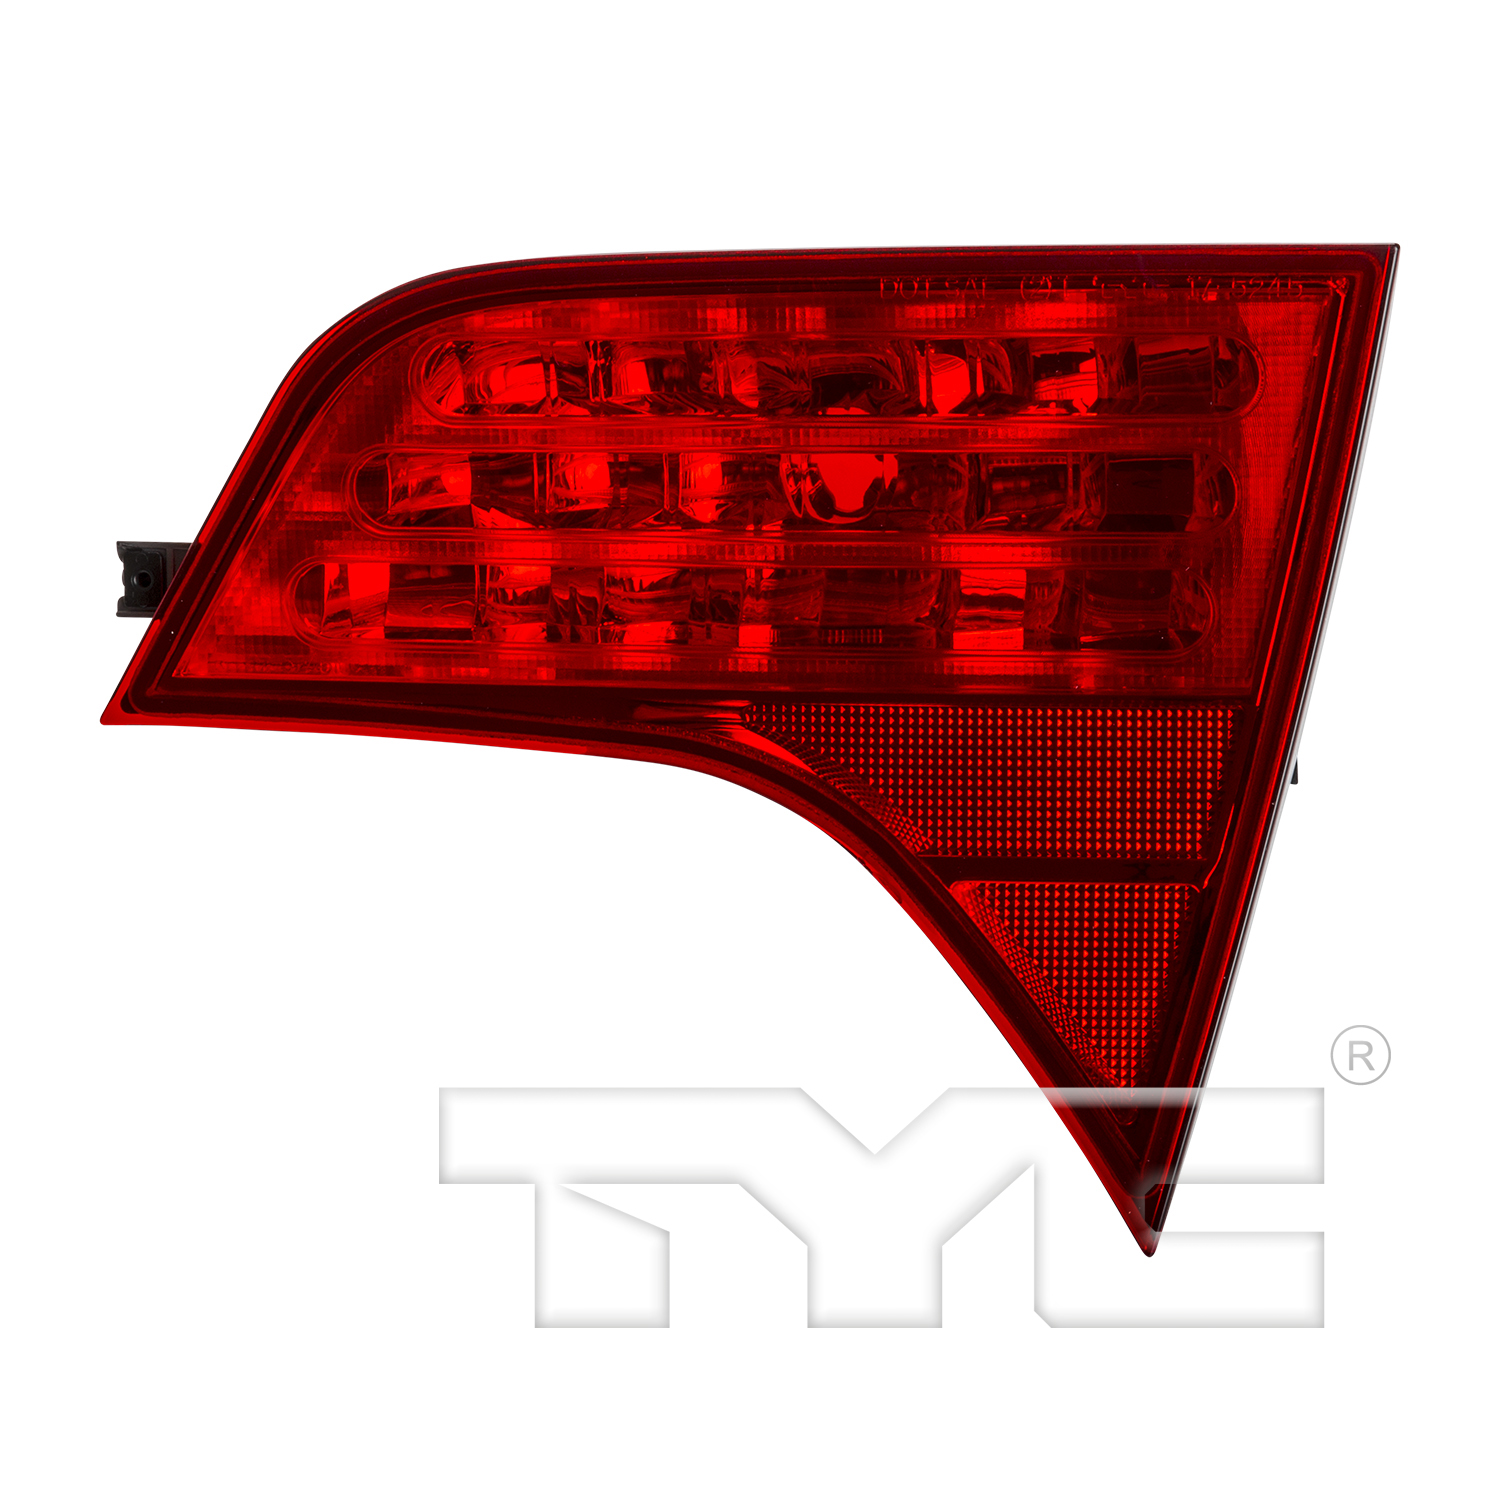 Aftermarket TAILLIGHTS for HONDA - CIVIC, CIVIC,06-11,RT Taillamp assy